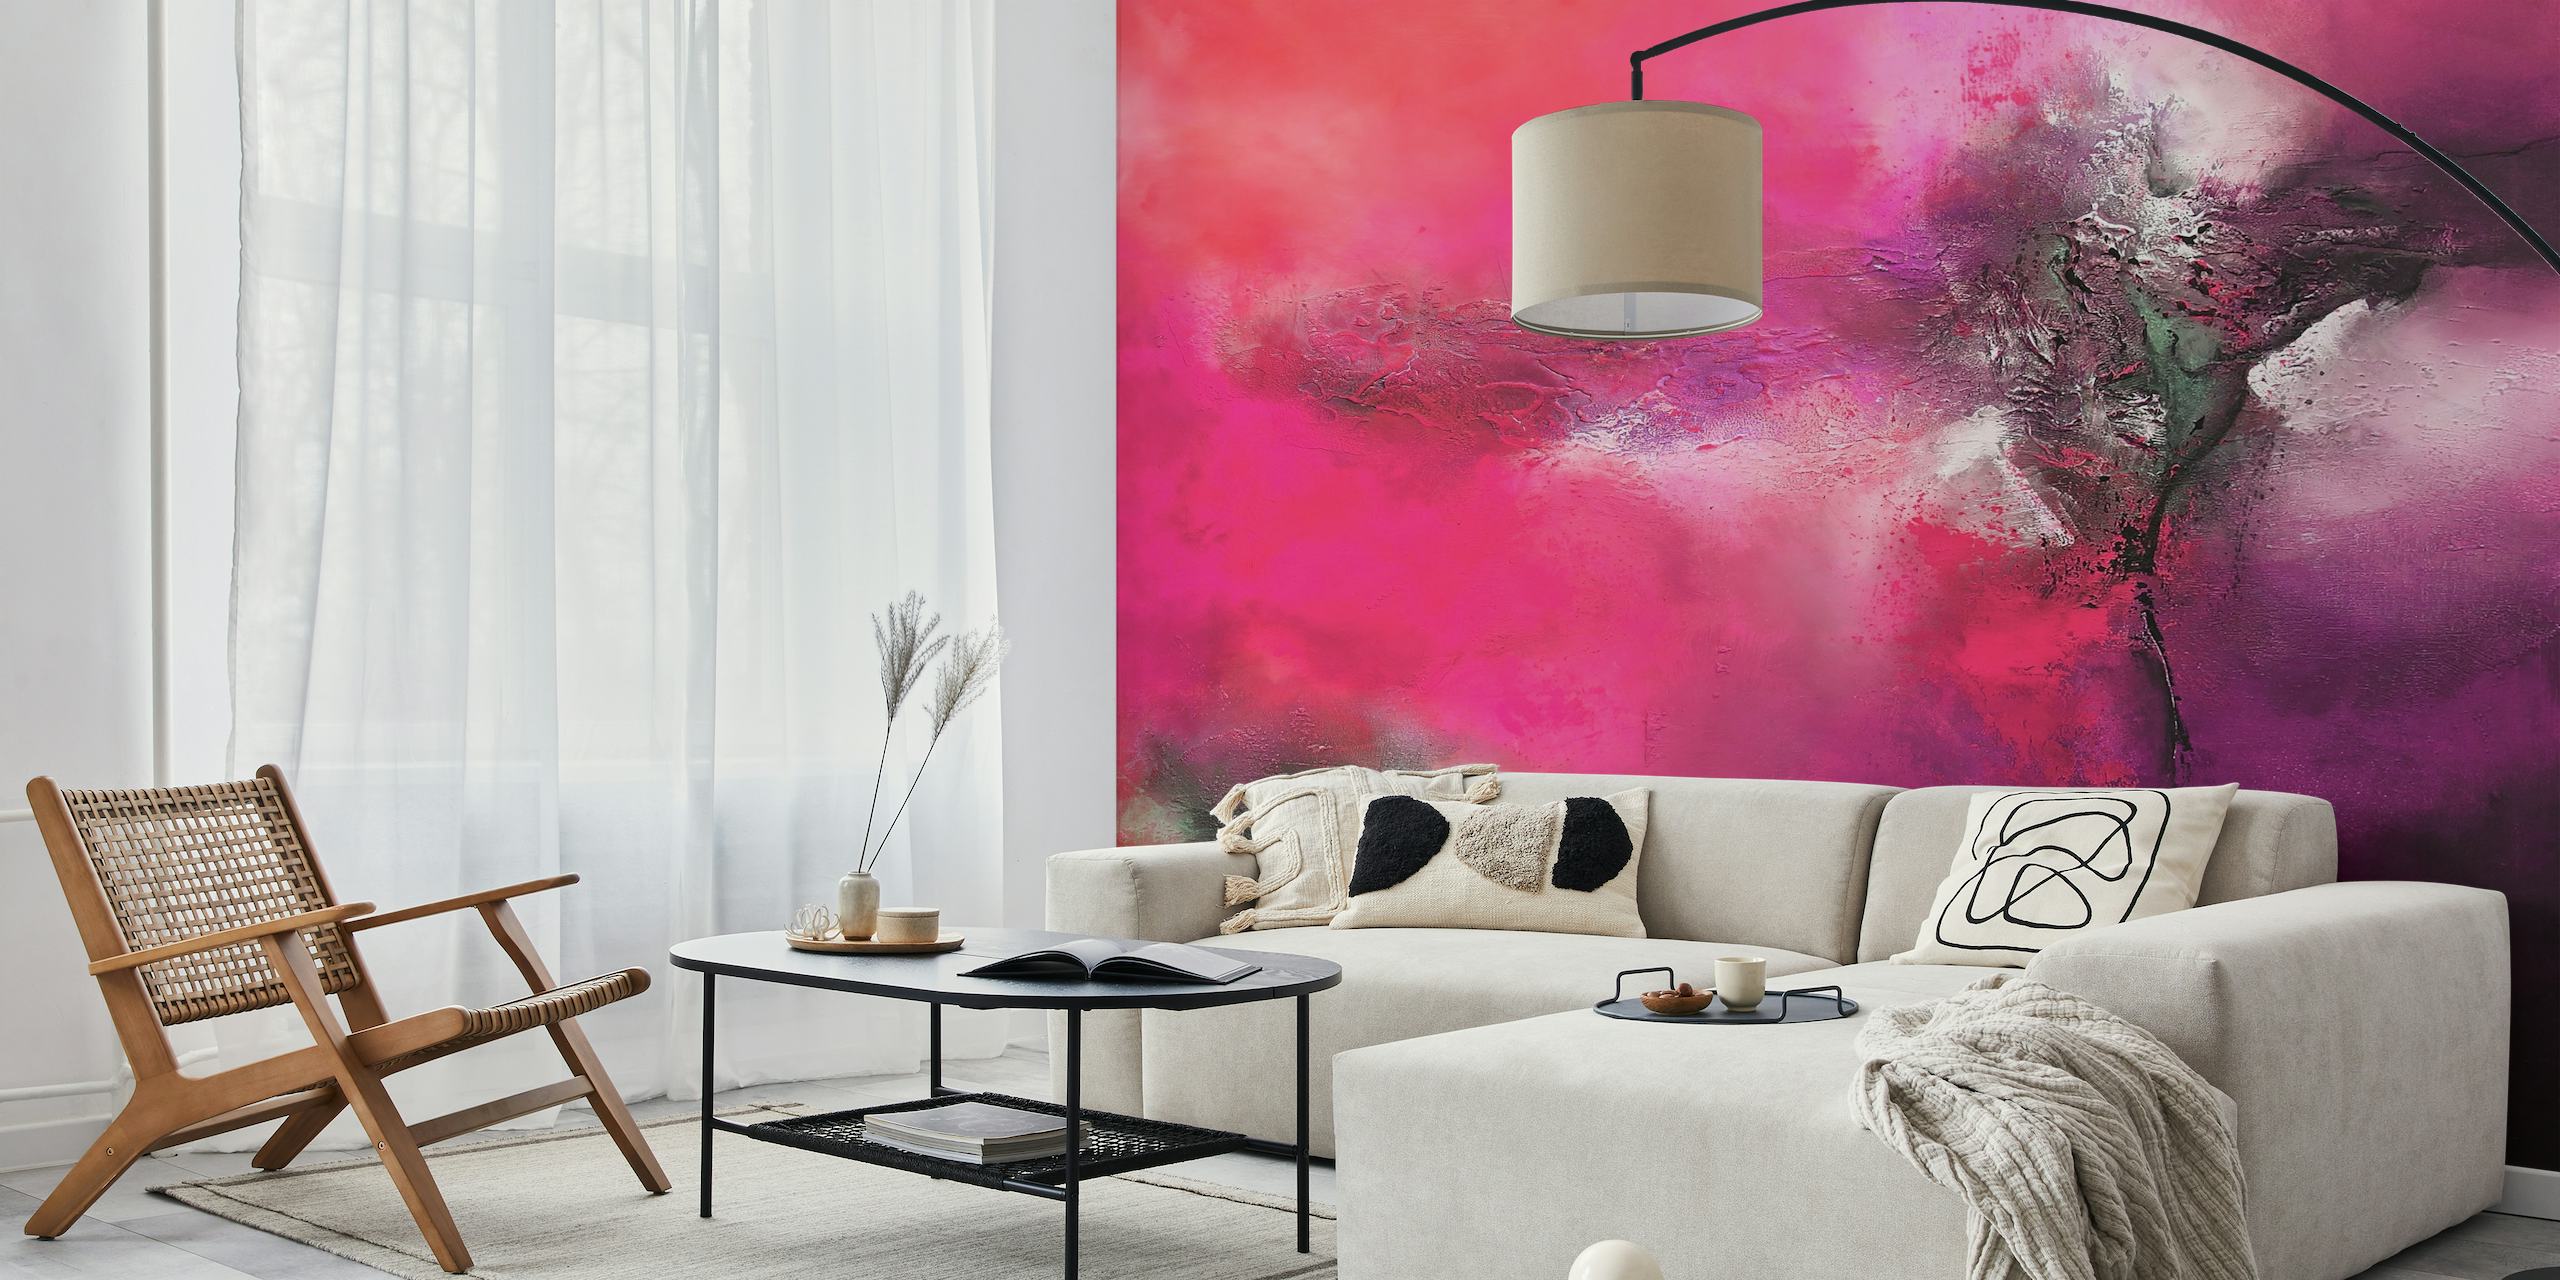 Abstract wall mural with vibrant pink and gray shades, resembling expressive art